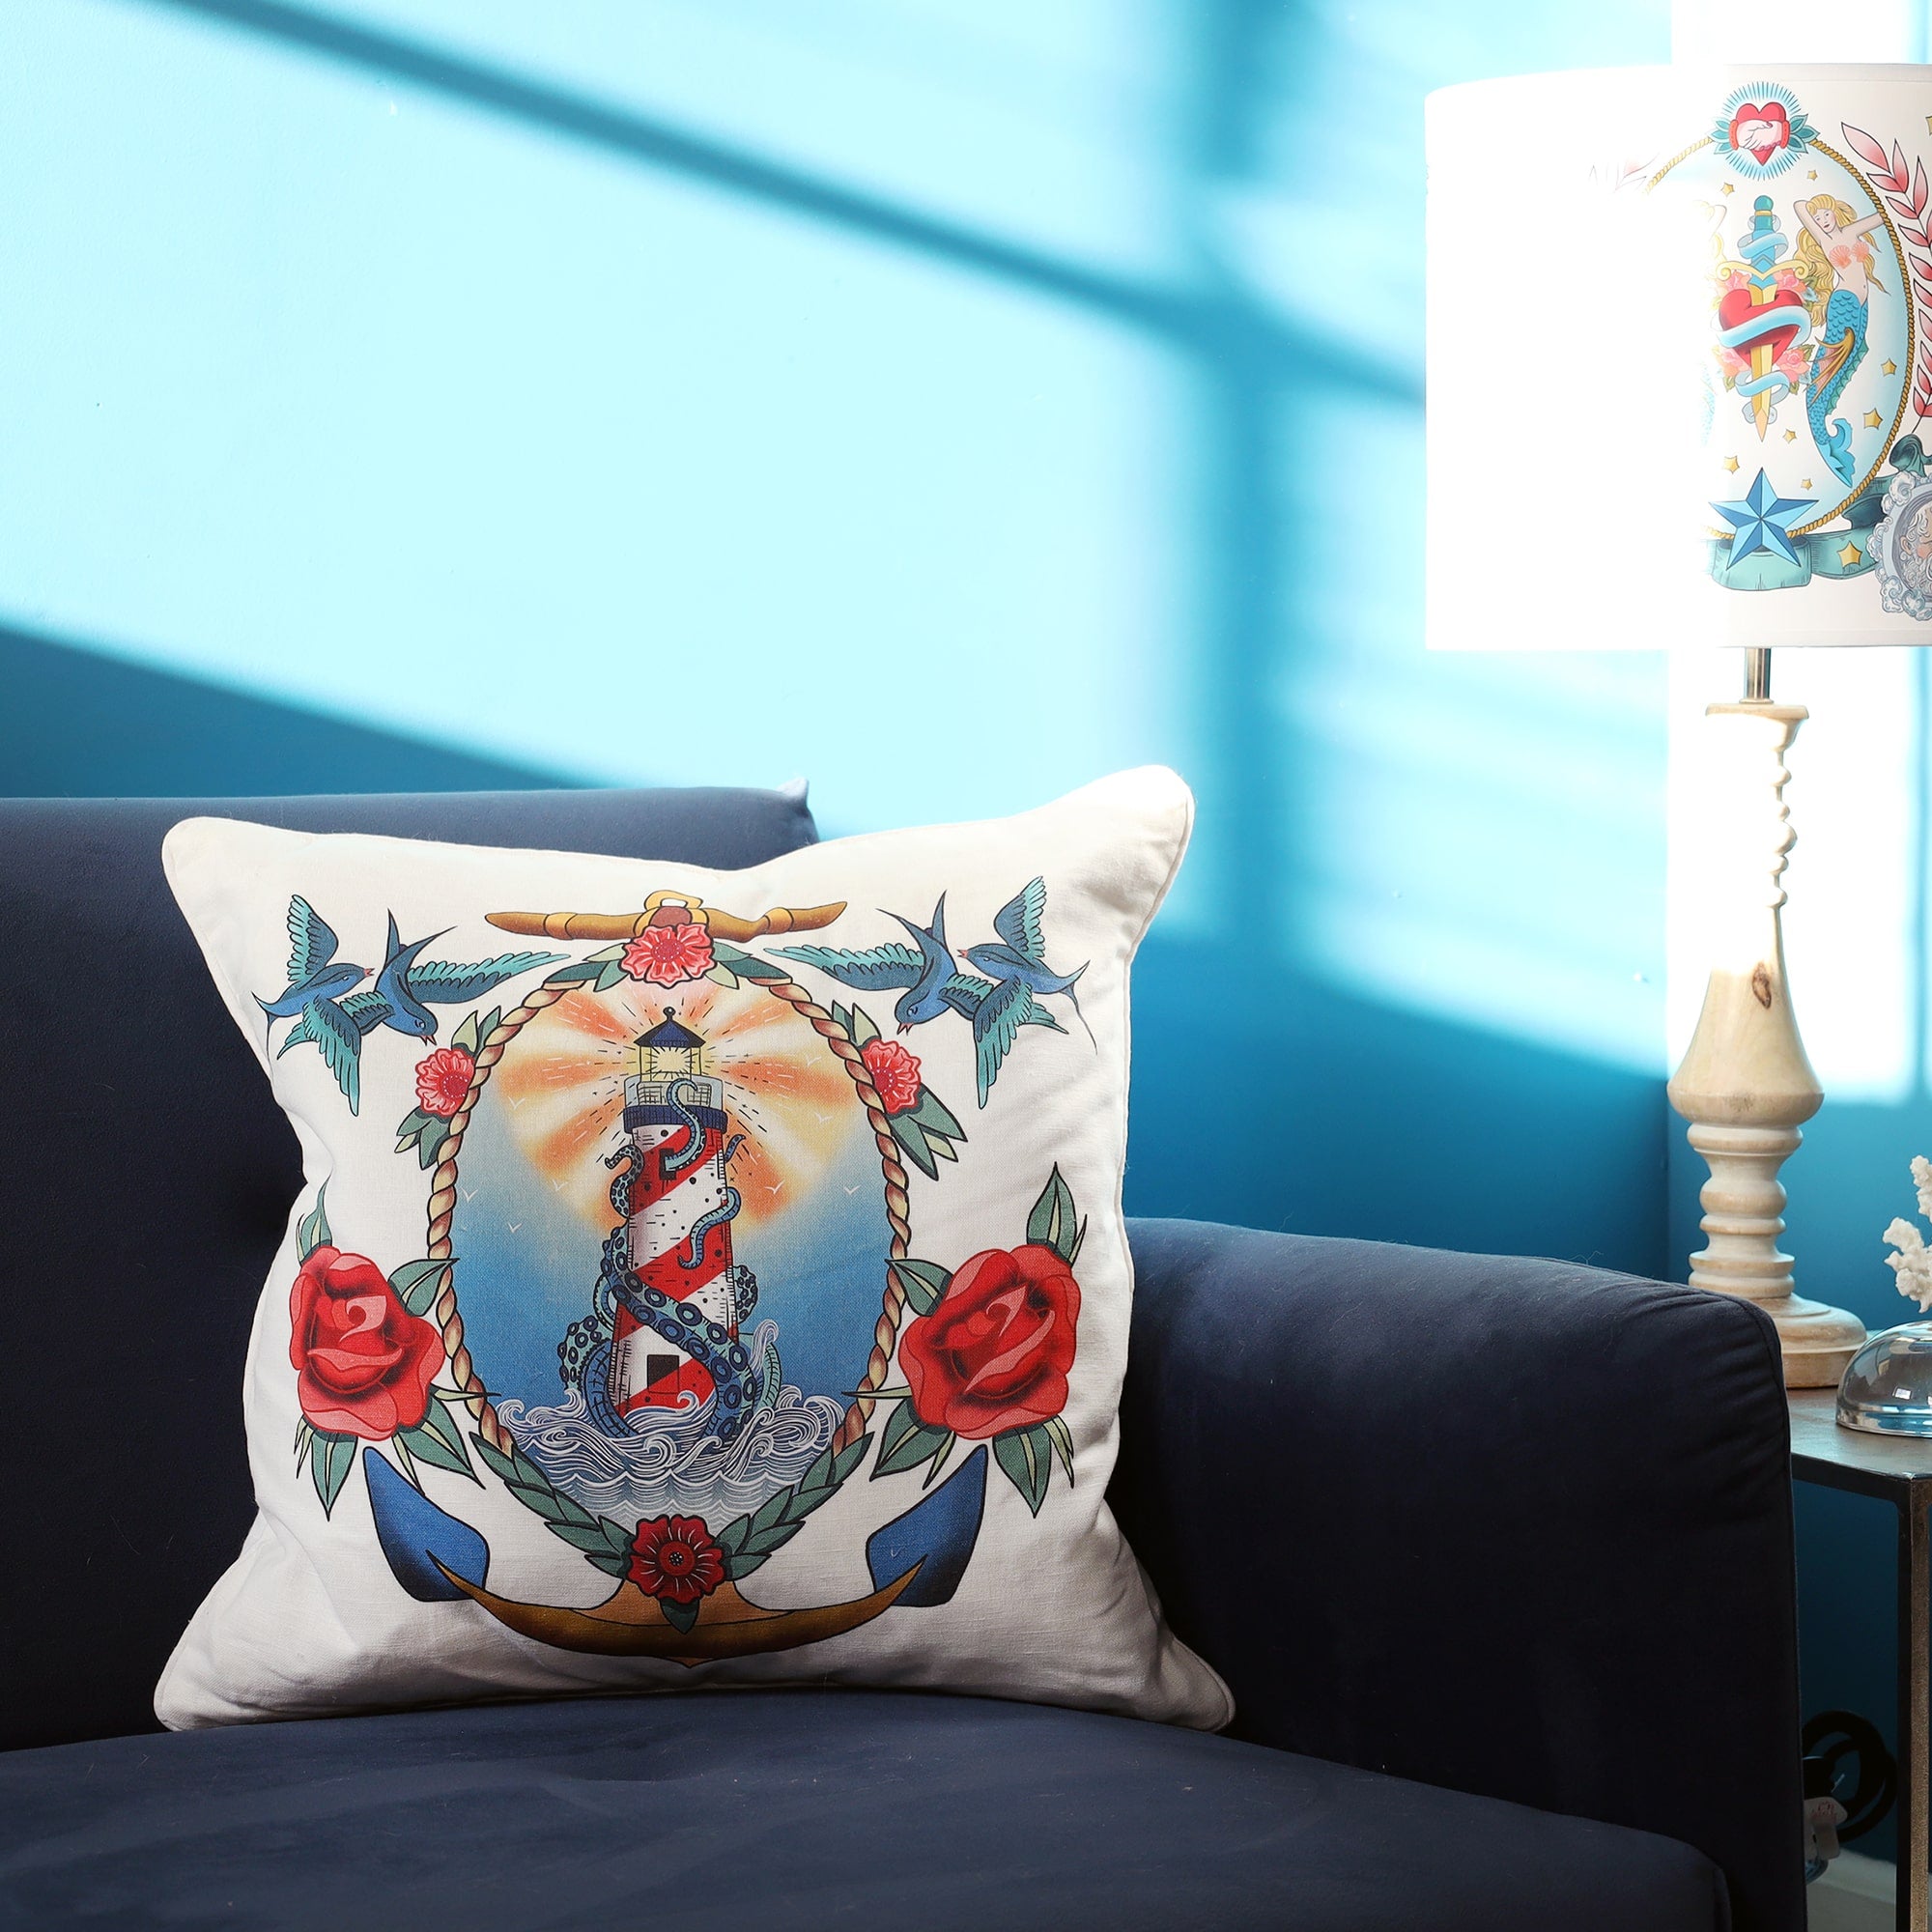 White cushion with brightly coloured tattoo inspired lighthouse and kraken design in a rope and anchor vignette with roses and swallows, on a navy velvet settee with sun streaming in.